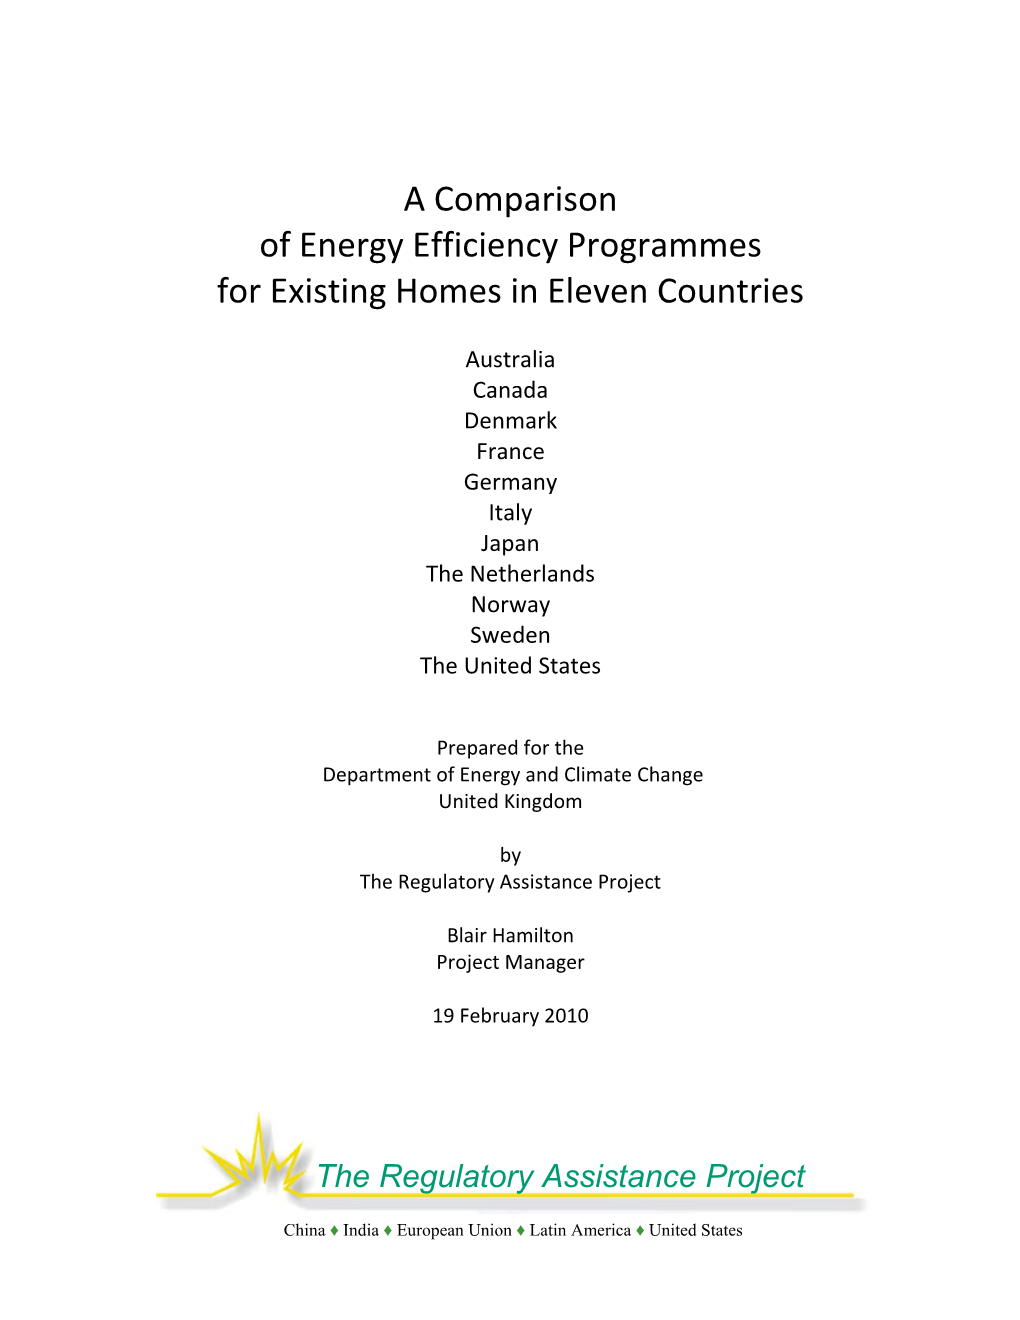 A Comparison of Energy Efficiency Programmes for Existing Homes in Eleven Countries